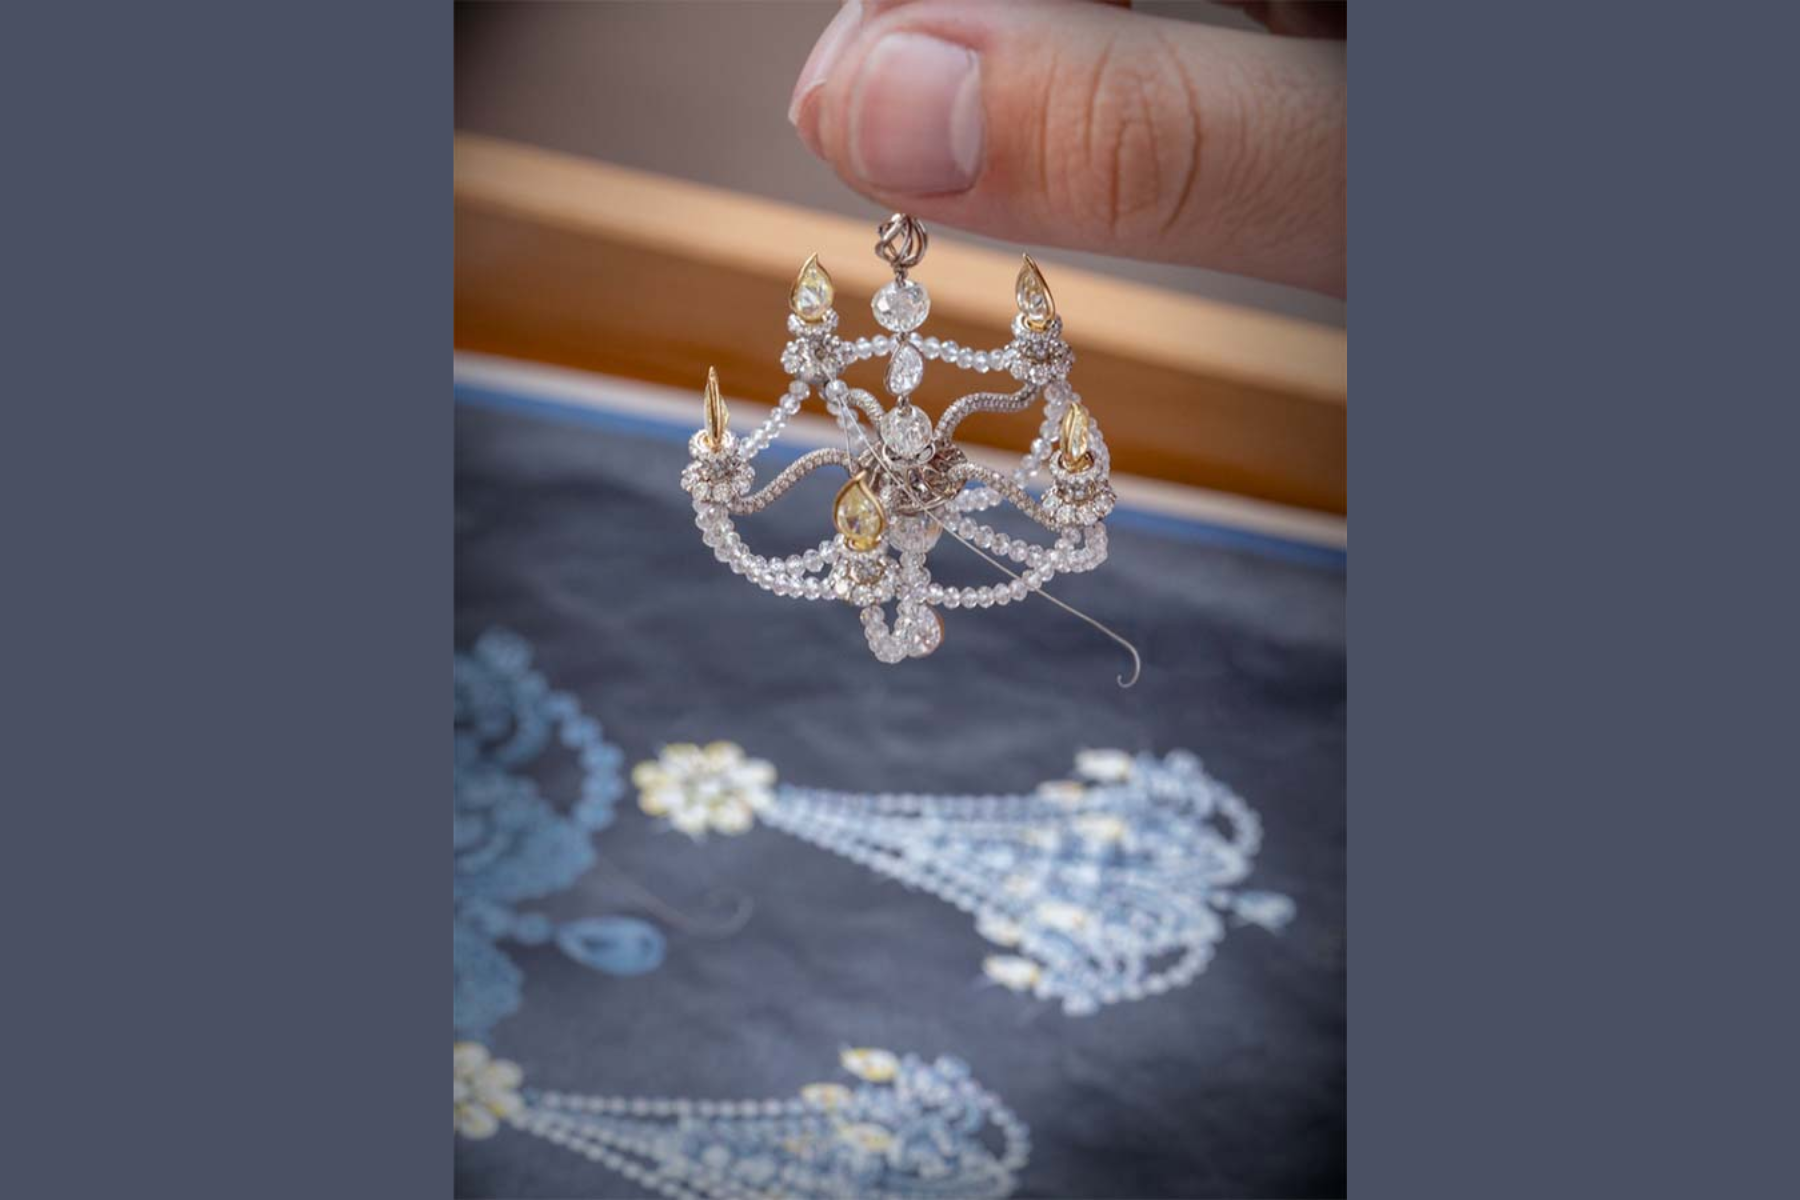 A white hand is holding a Chopard's diamond chandelier earring